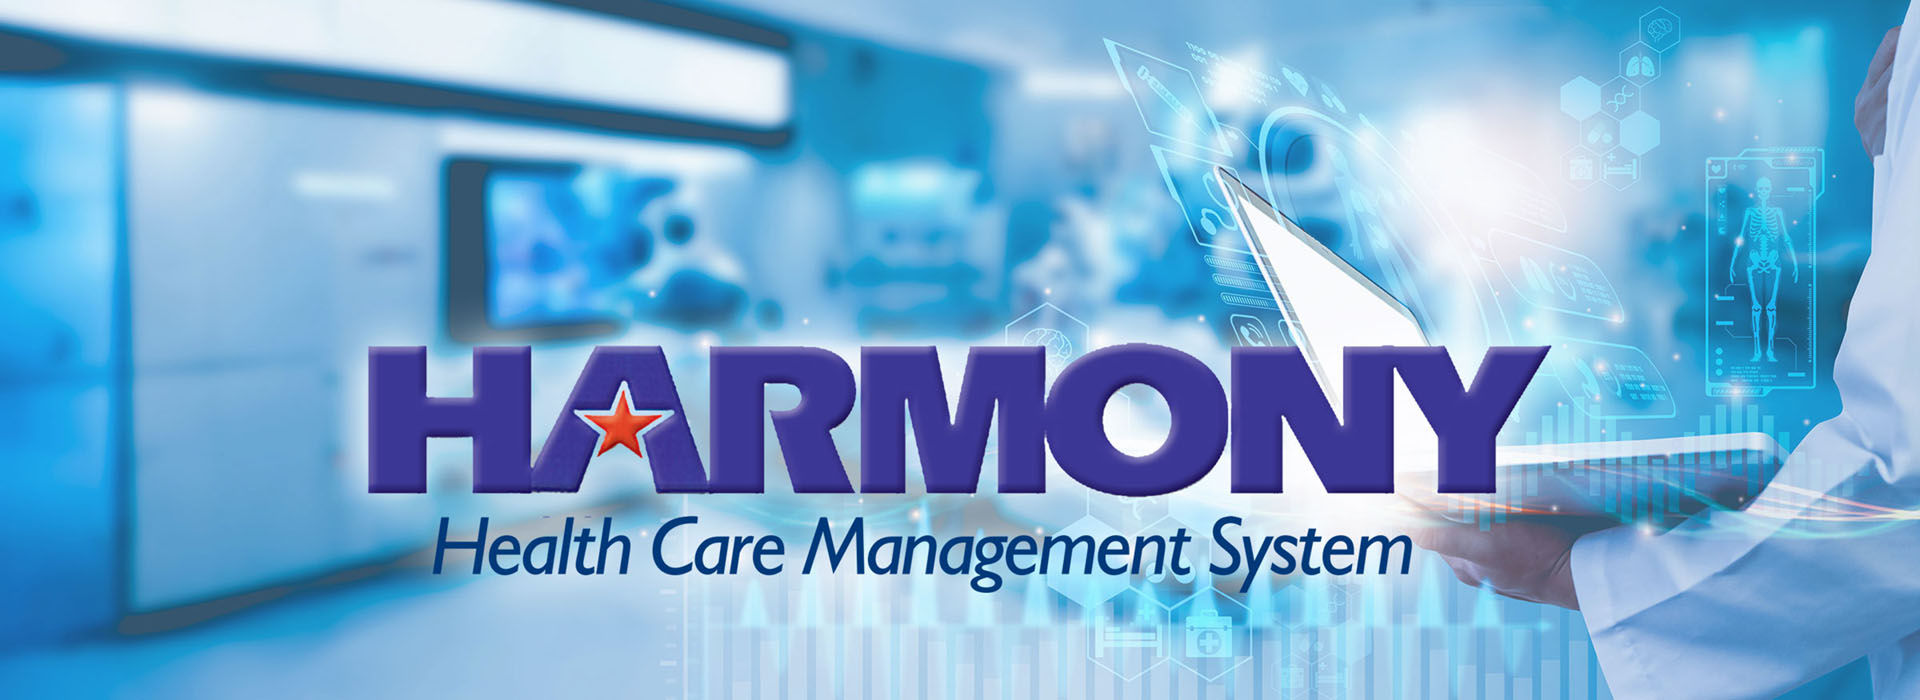 Harmony Health Care Management System. A comprehensive system for managing healthcare operations efficiently.